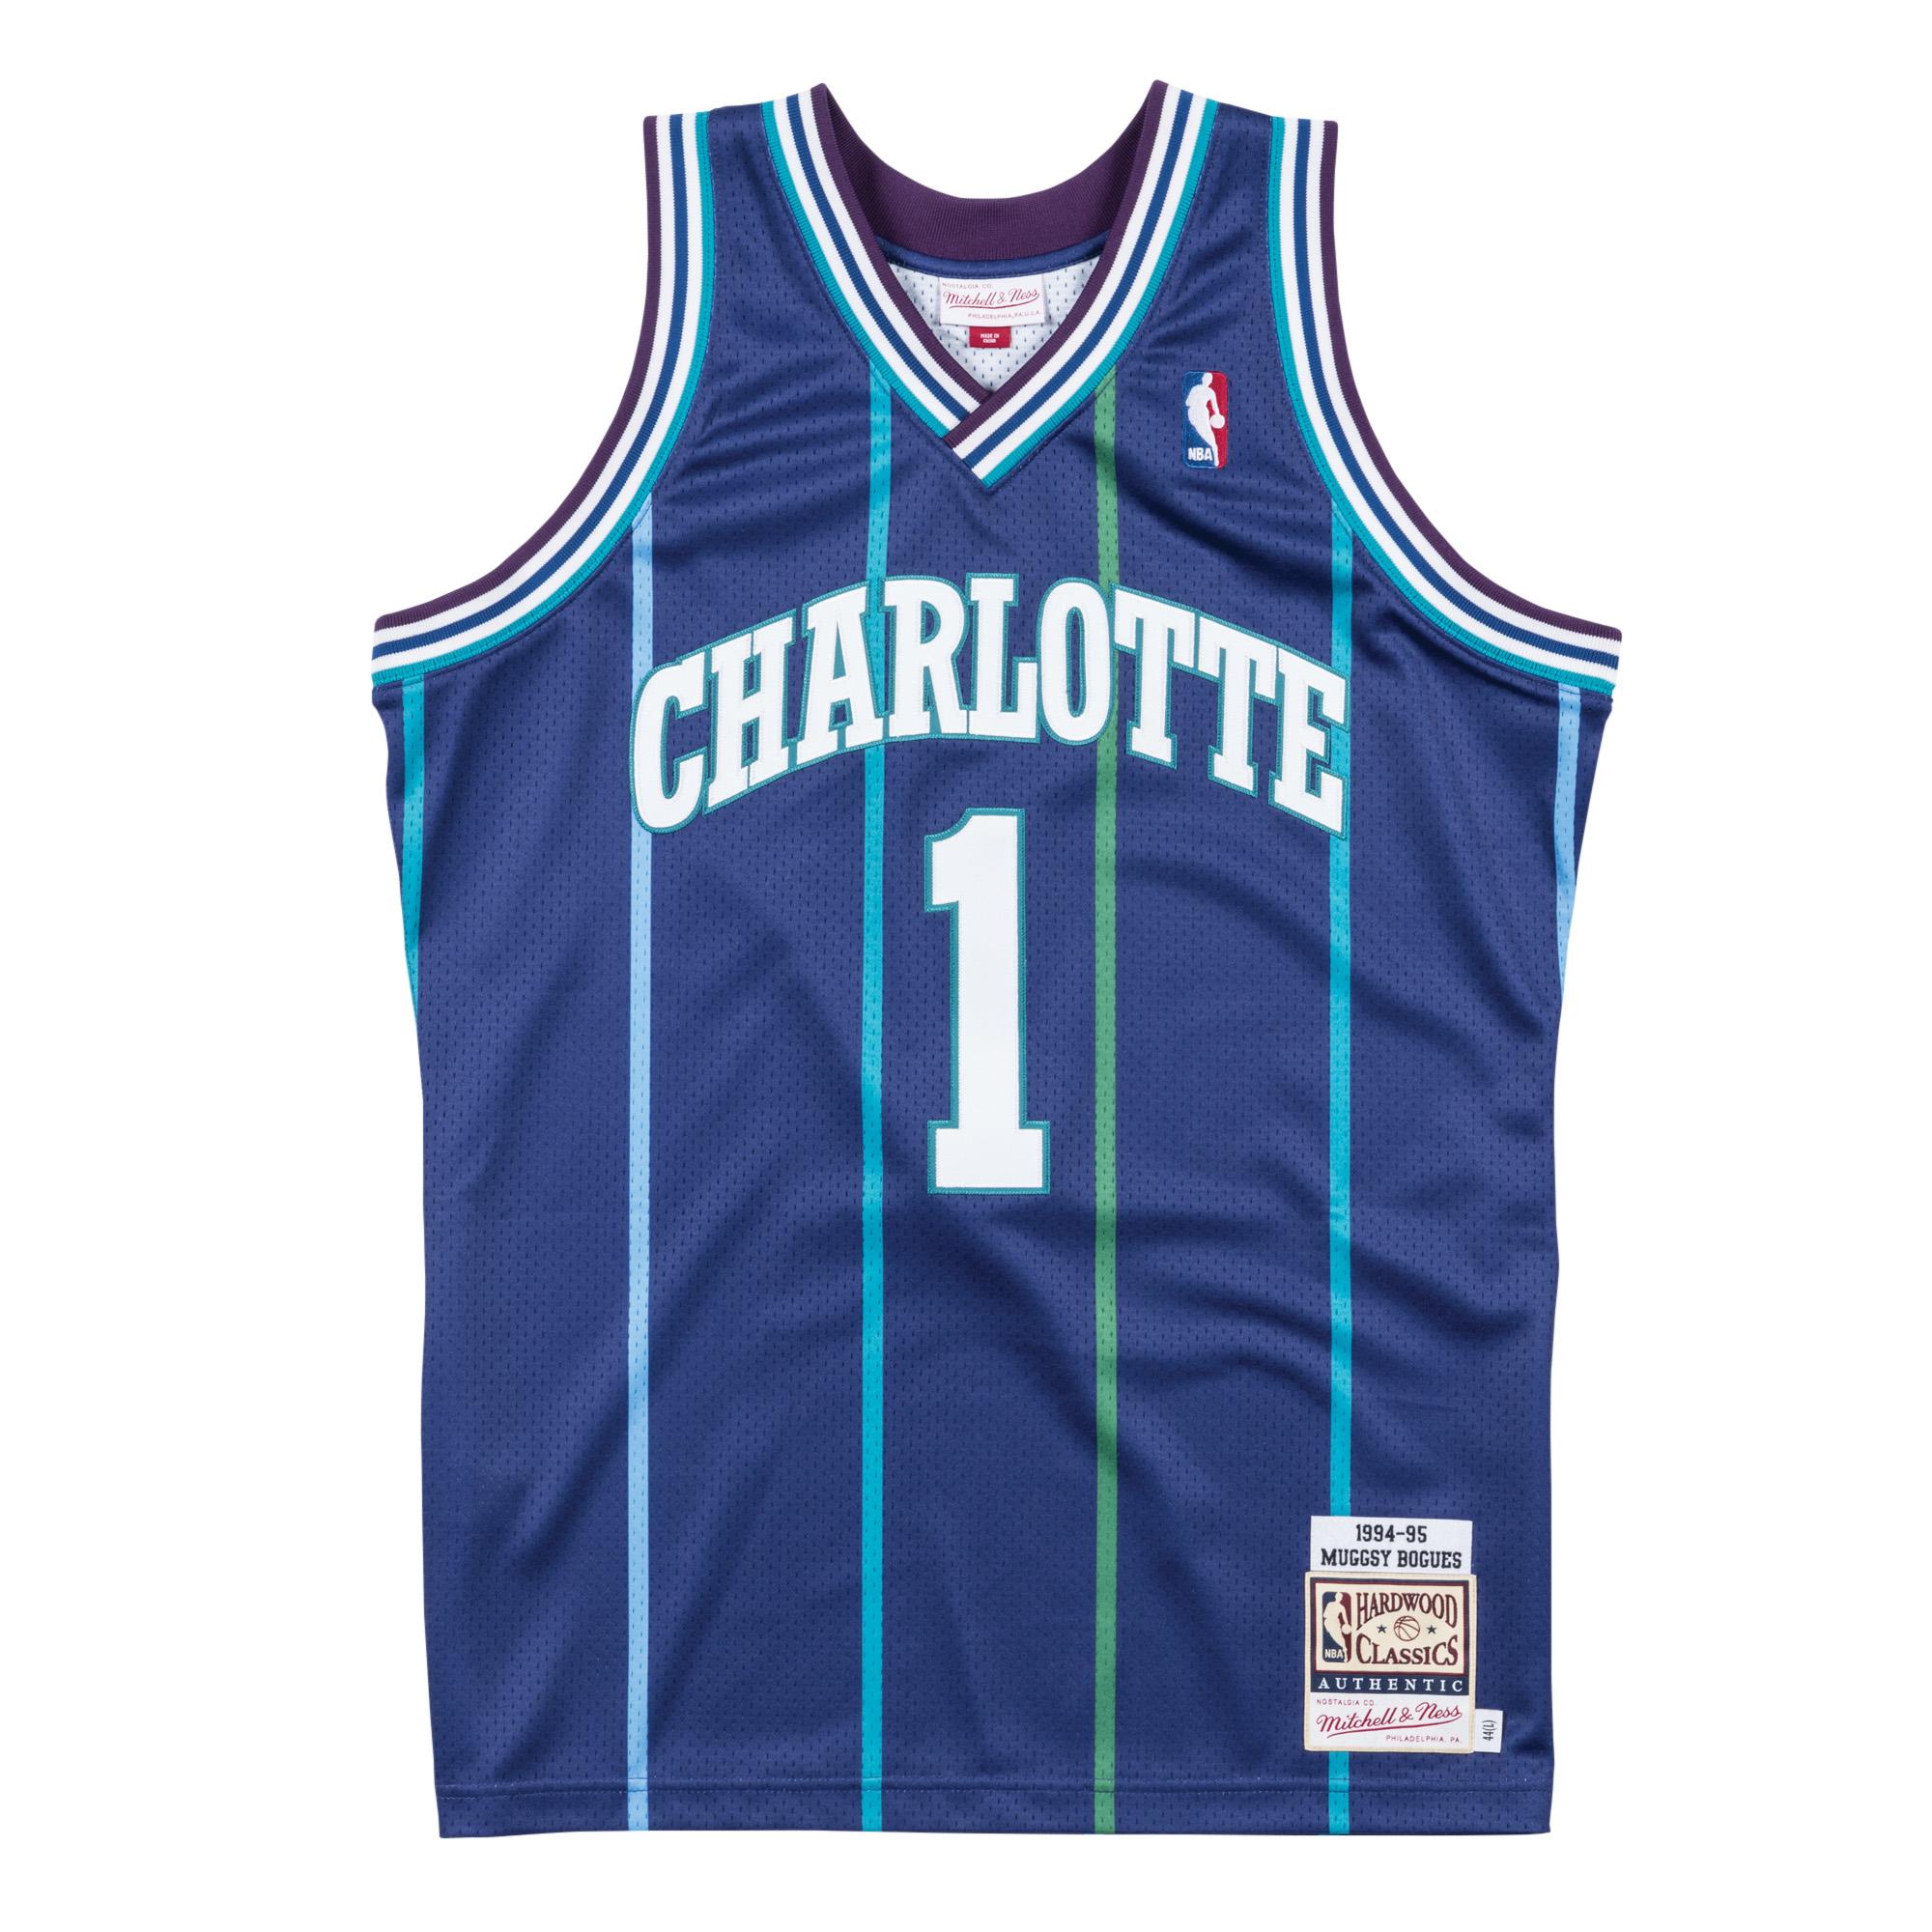 Mitchell & Ness | Muggsy Bogues 1994-95 Alternate Charlotte Hornets Authentic Jersey2000 x 2000